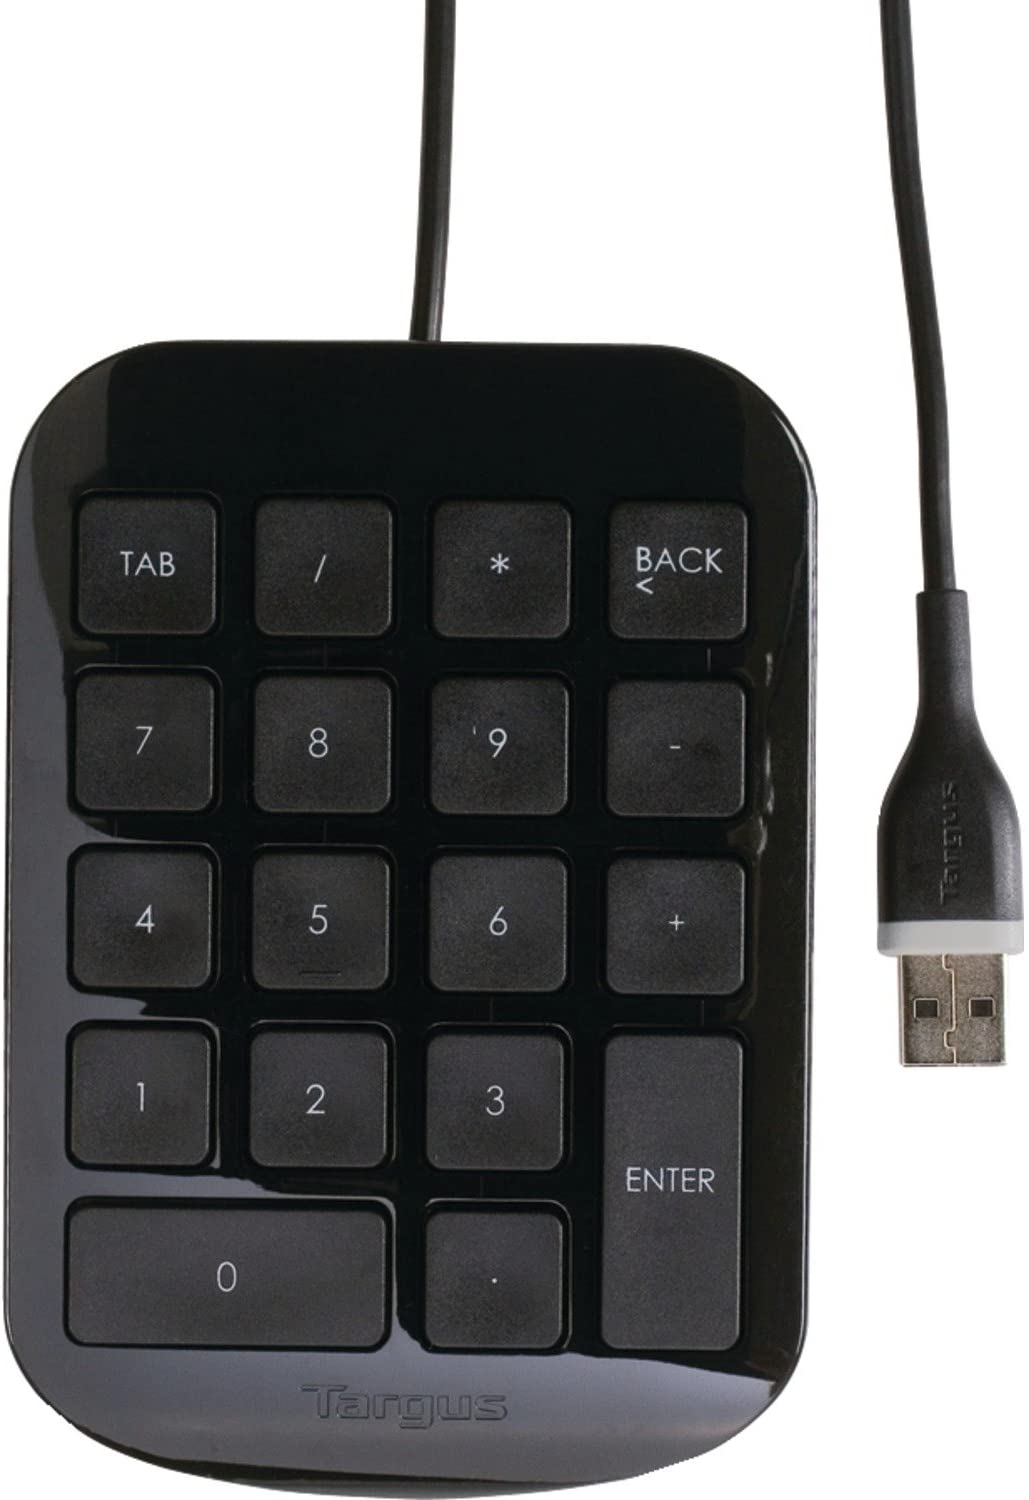 Targus Numeric Keypad with USB Port Connector, True Plug-and-Play Device, Connects with Laptop, Desktop and Other Devices, Black (AKP10US) Black/gray